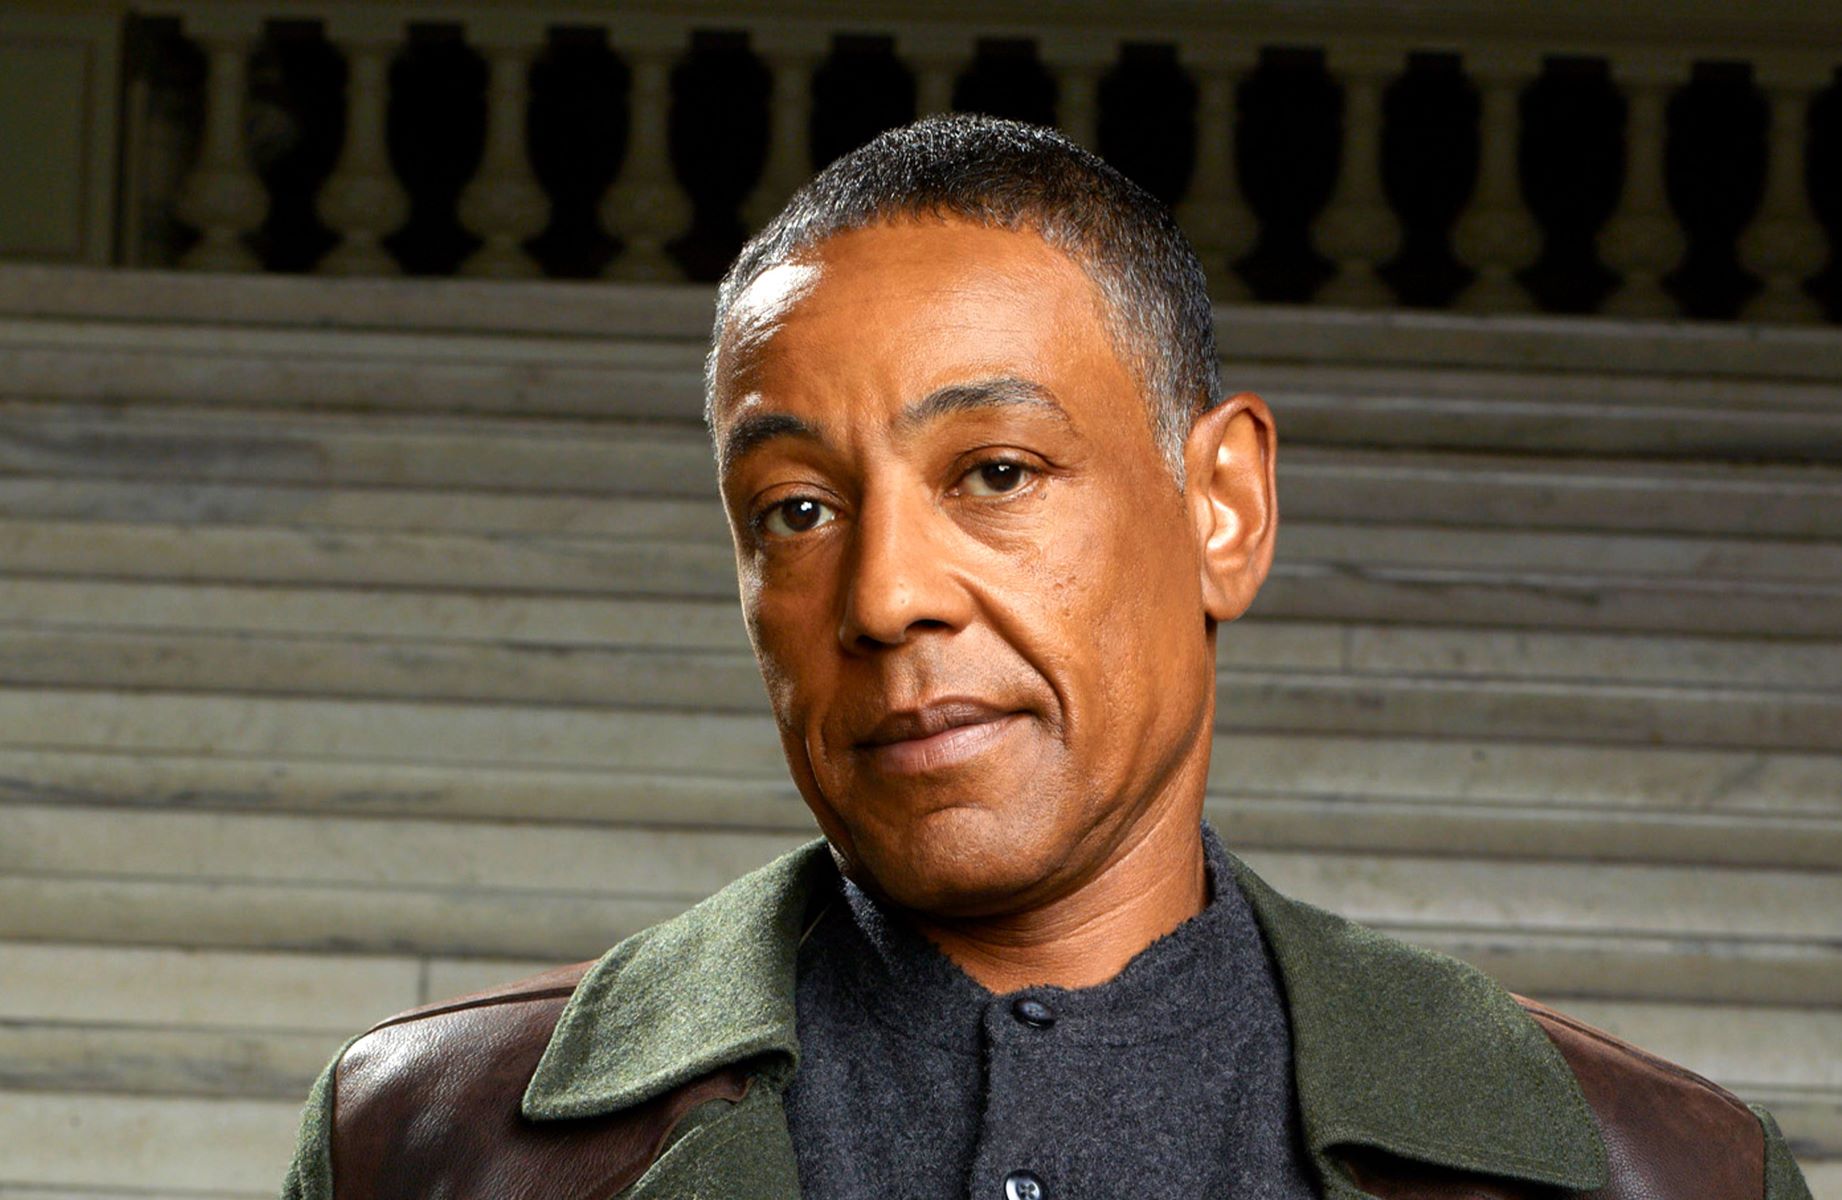 21 Unbelievable Facts About Giancarlo Esposito - Facts.net